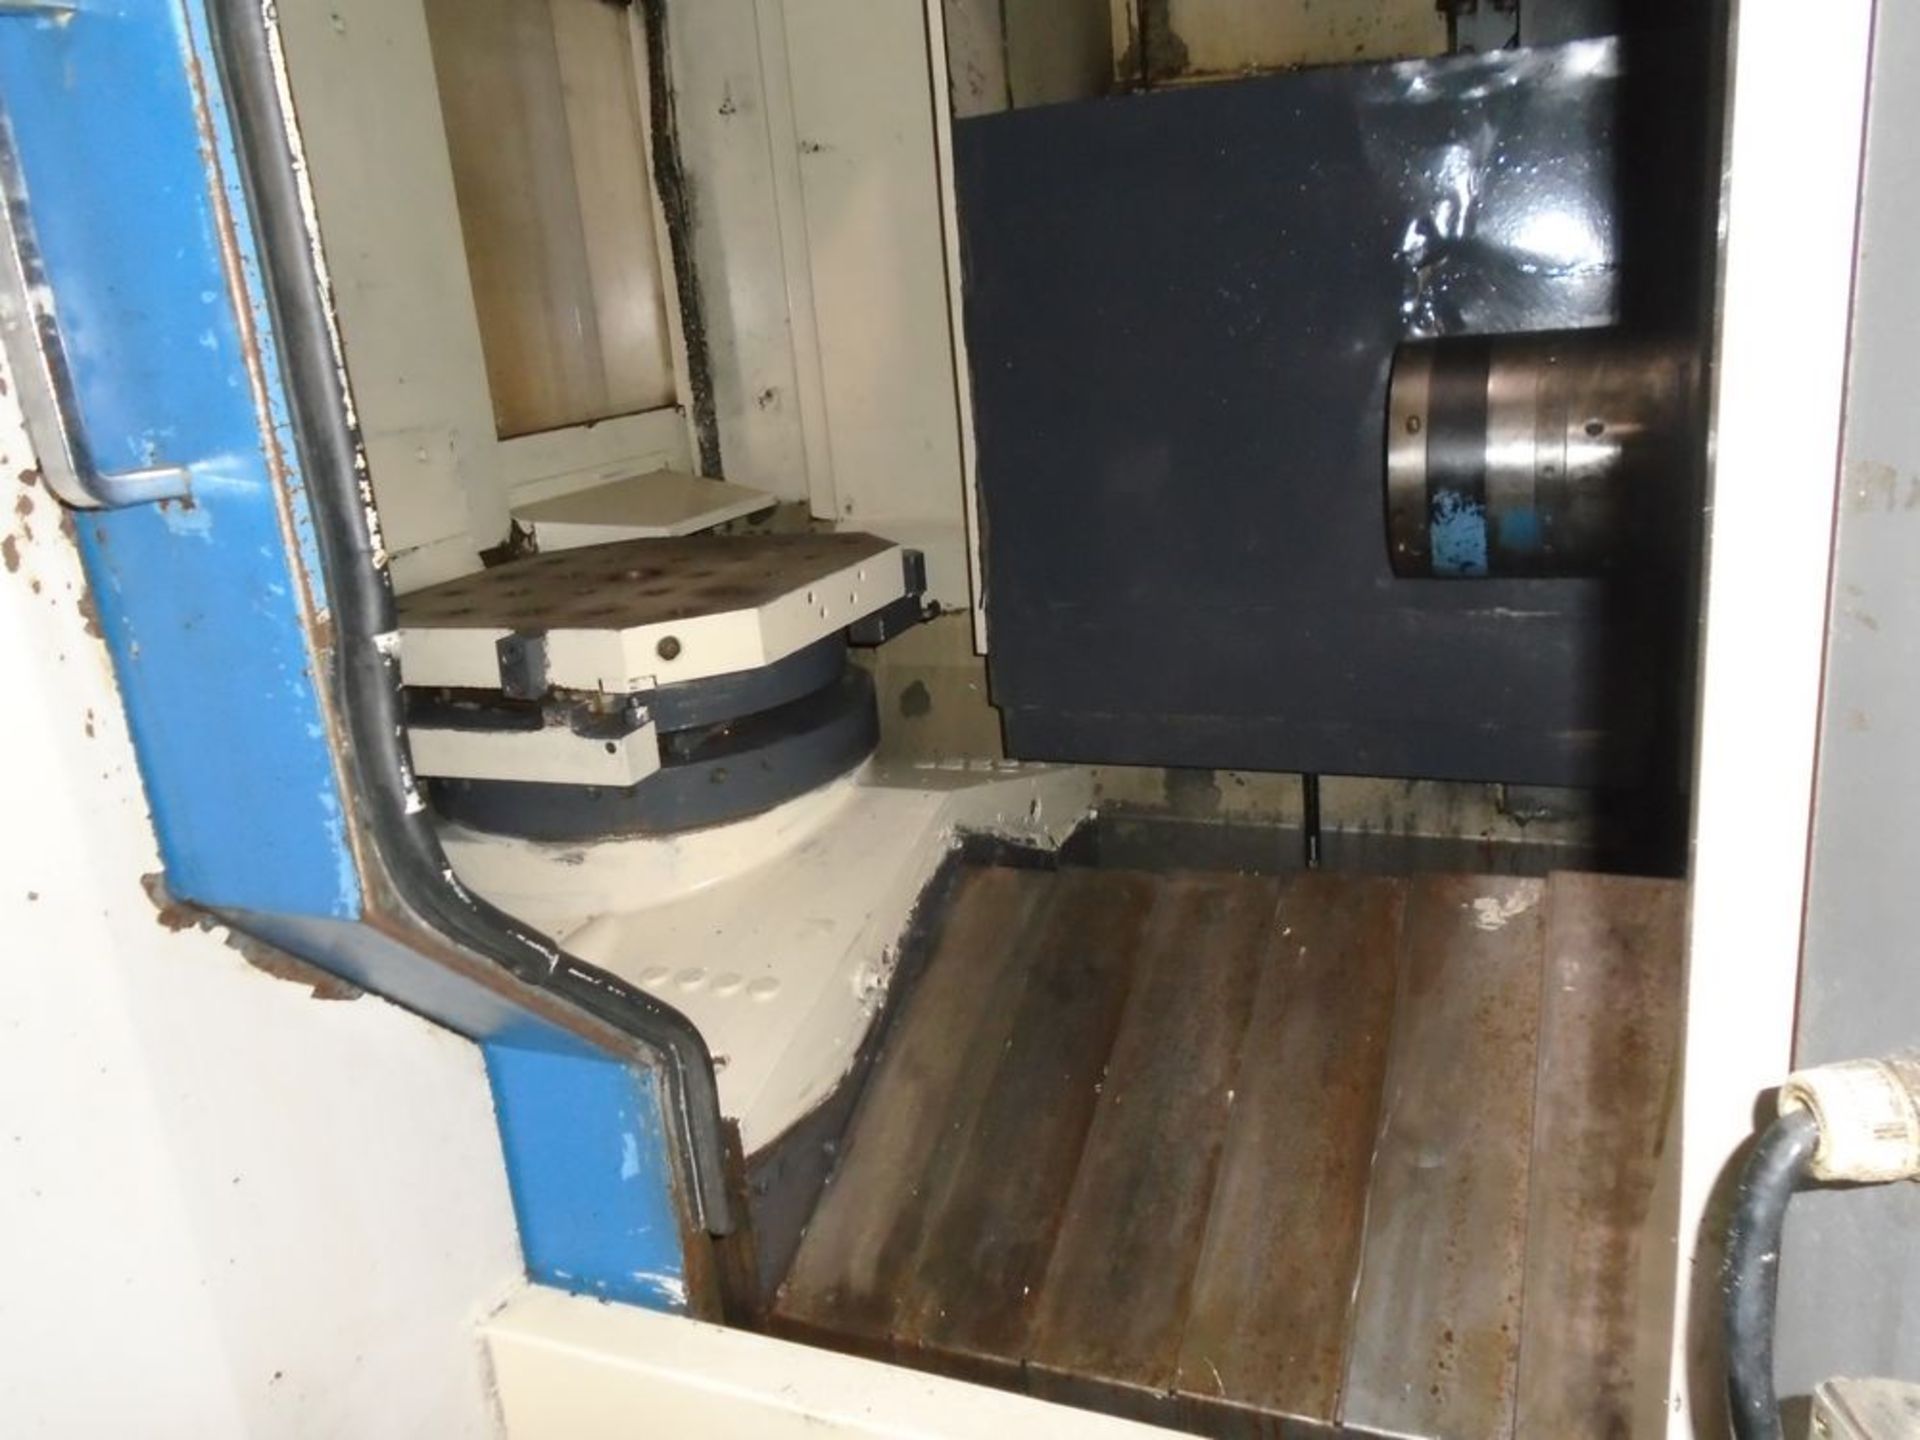 Toyoda FA-450II Horizontal Machining Center / CNC MillSPECIFICATIONS:PALLET DIMENSIONS: 17.7 x 17. - Image 3 of 5